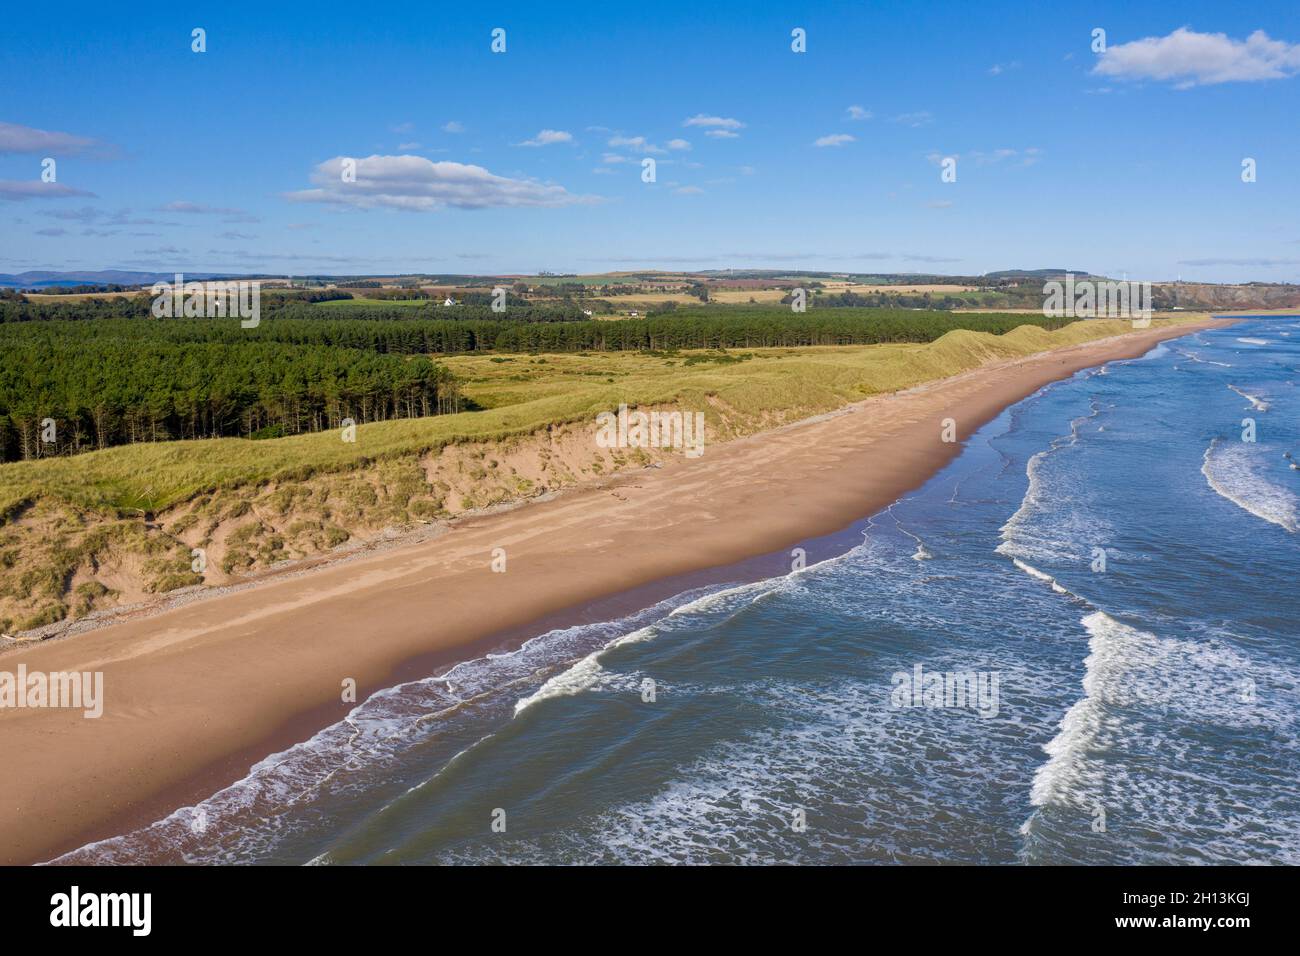 North end of Montrose beach in Angus, Scotland looking towards St. Cyrus and Aberdeenshire. Stock Photo